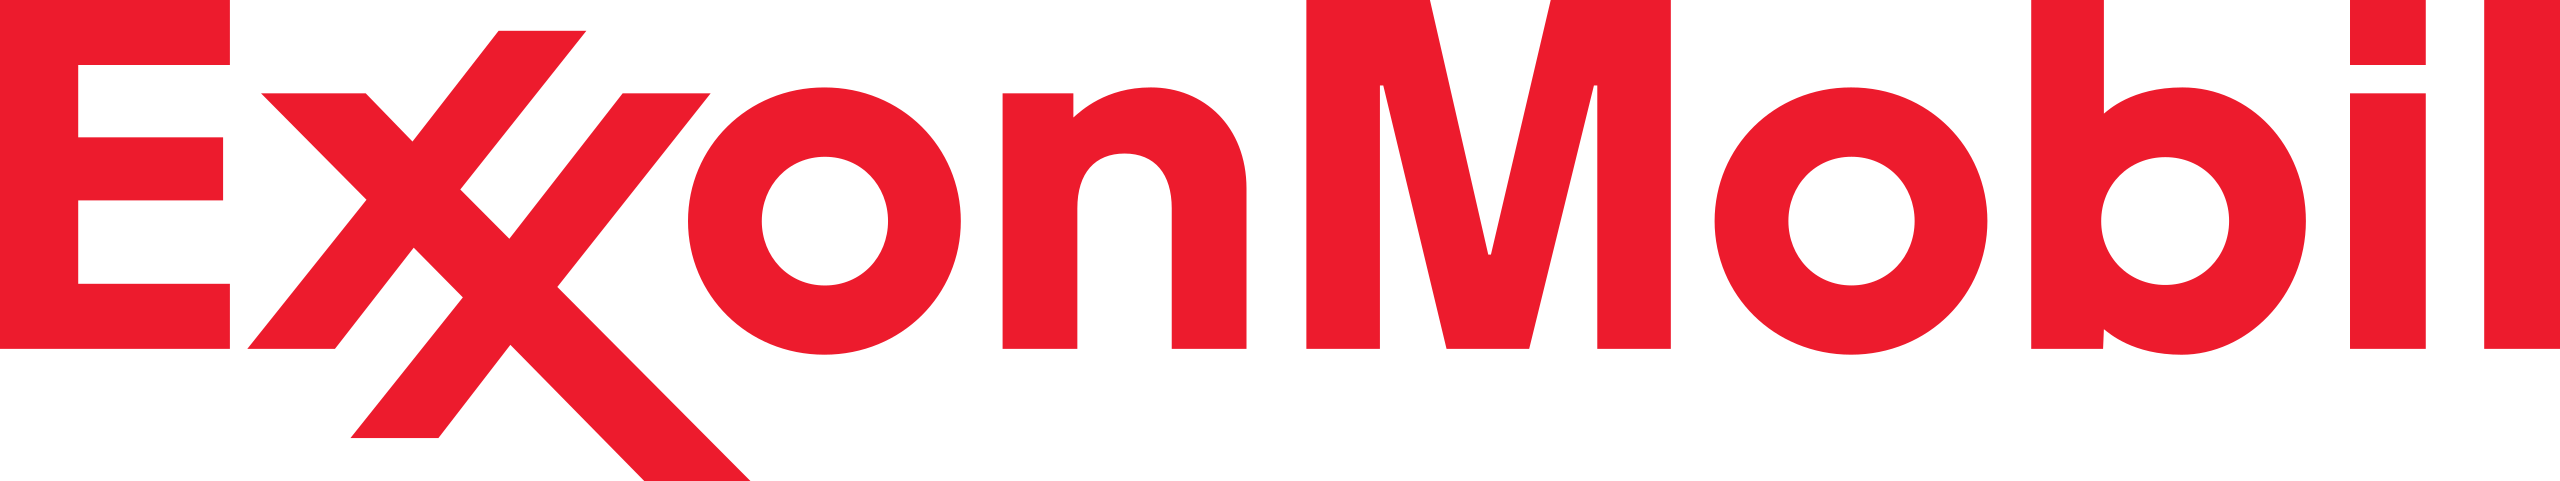 ExxonMobil Research and Engineering logo